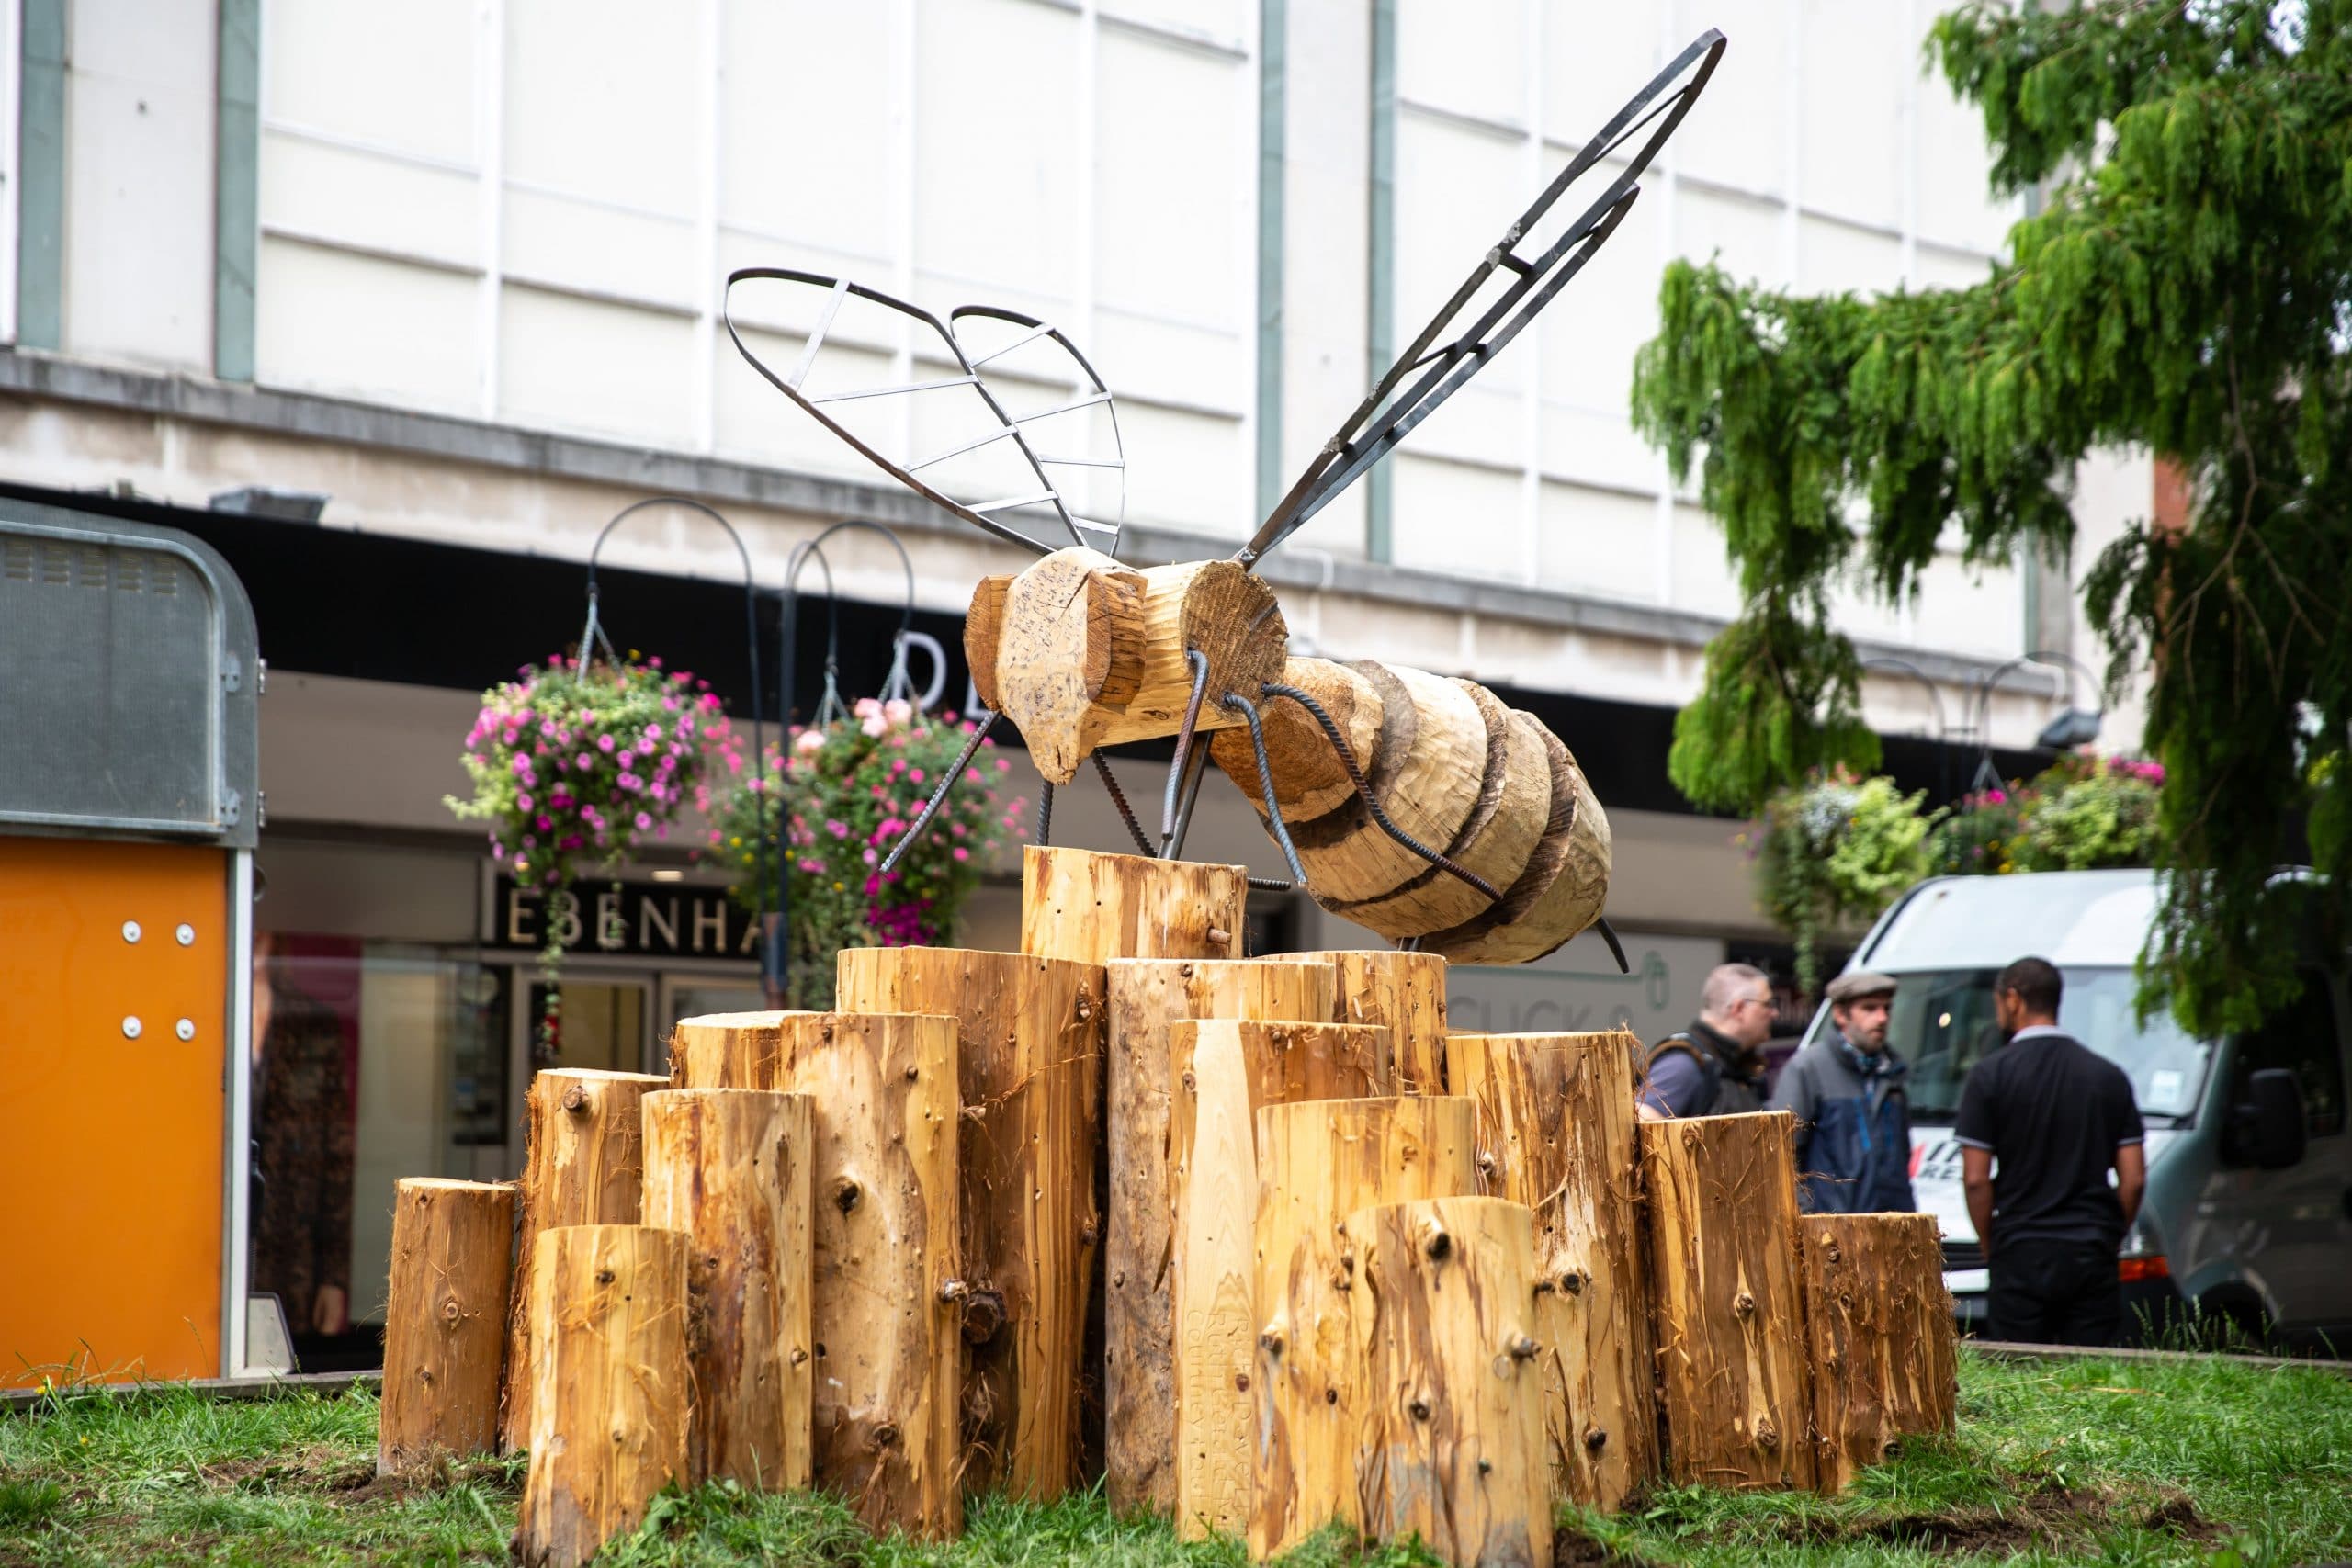 A picture of a large wooden bee with metal wings